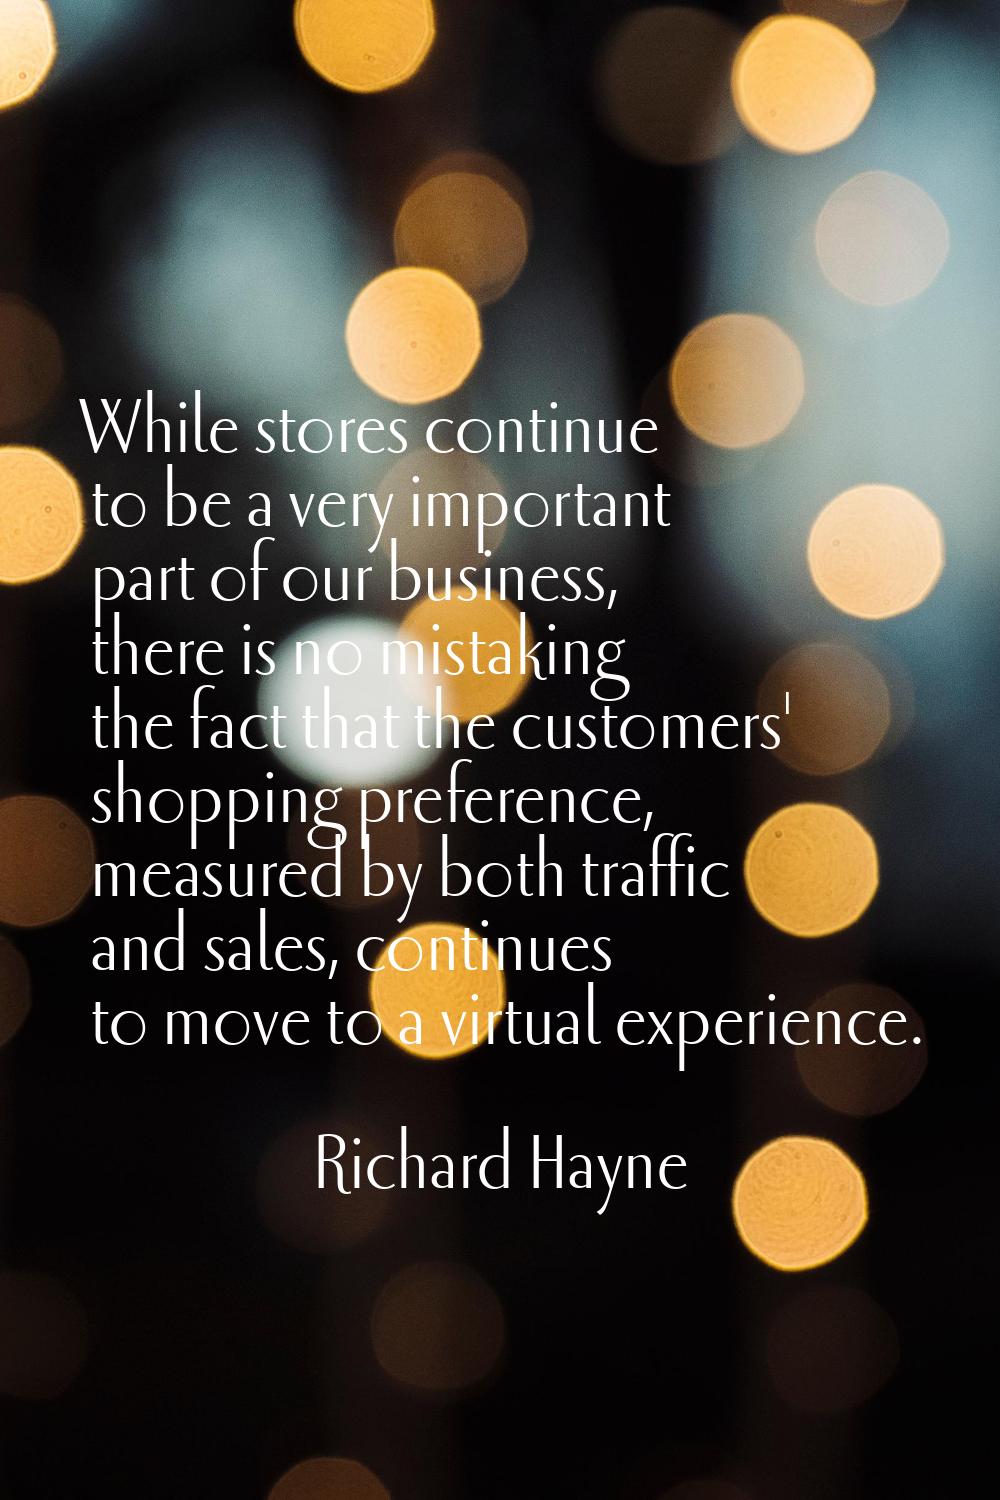 While stores continue to be a very important part of our business, there is no mistaking the fact t